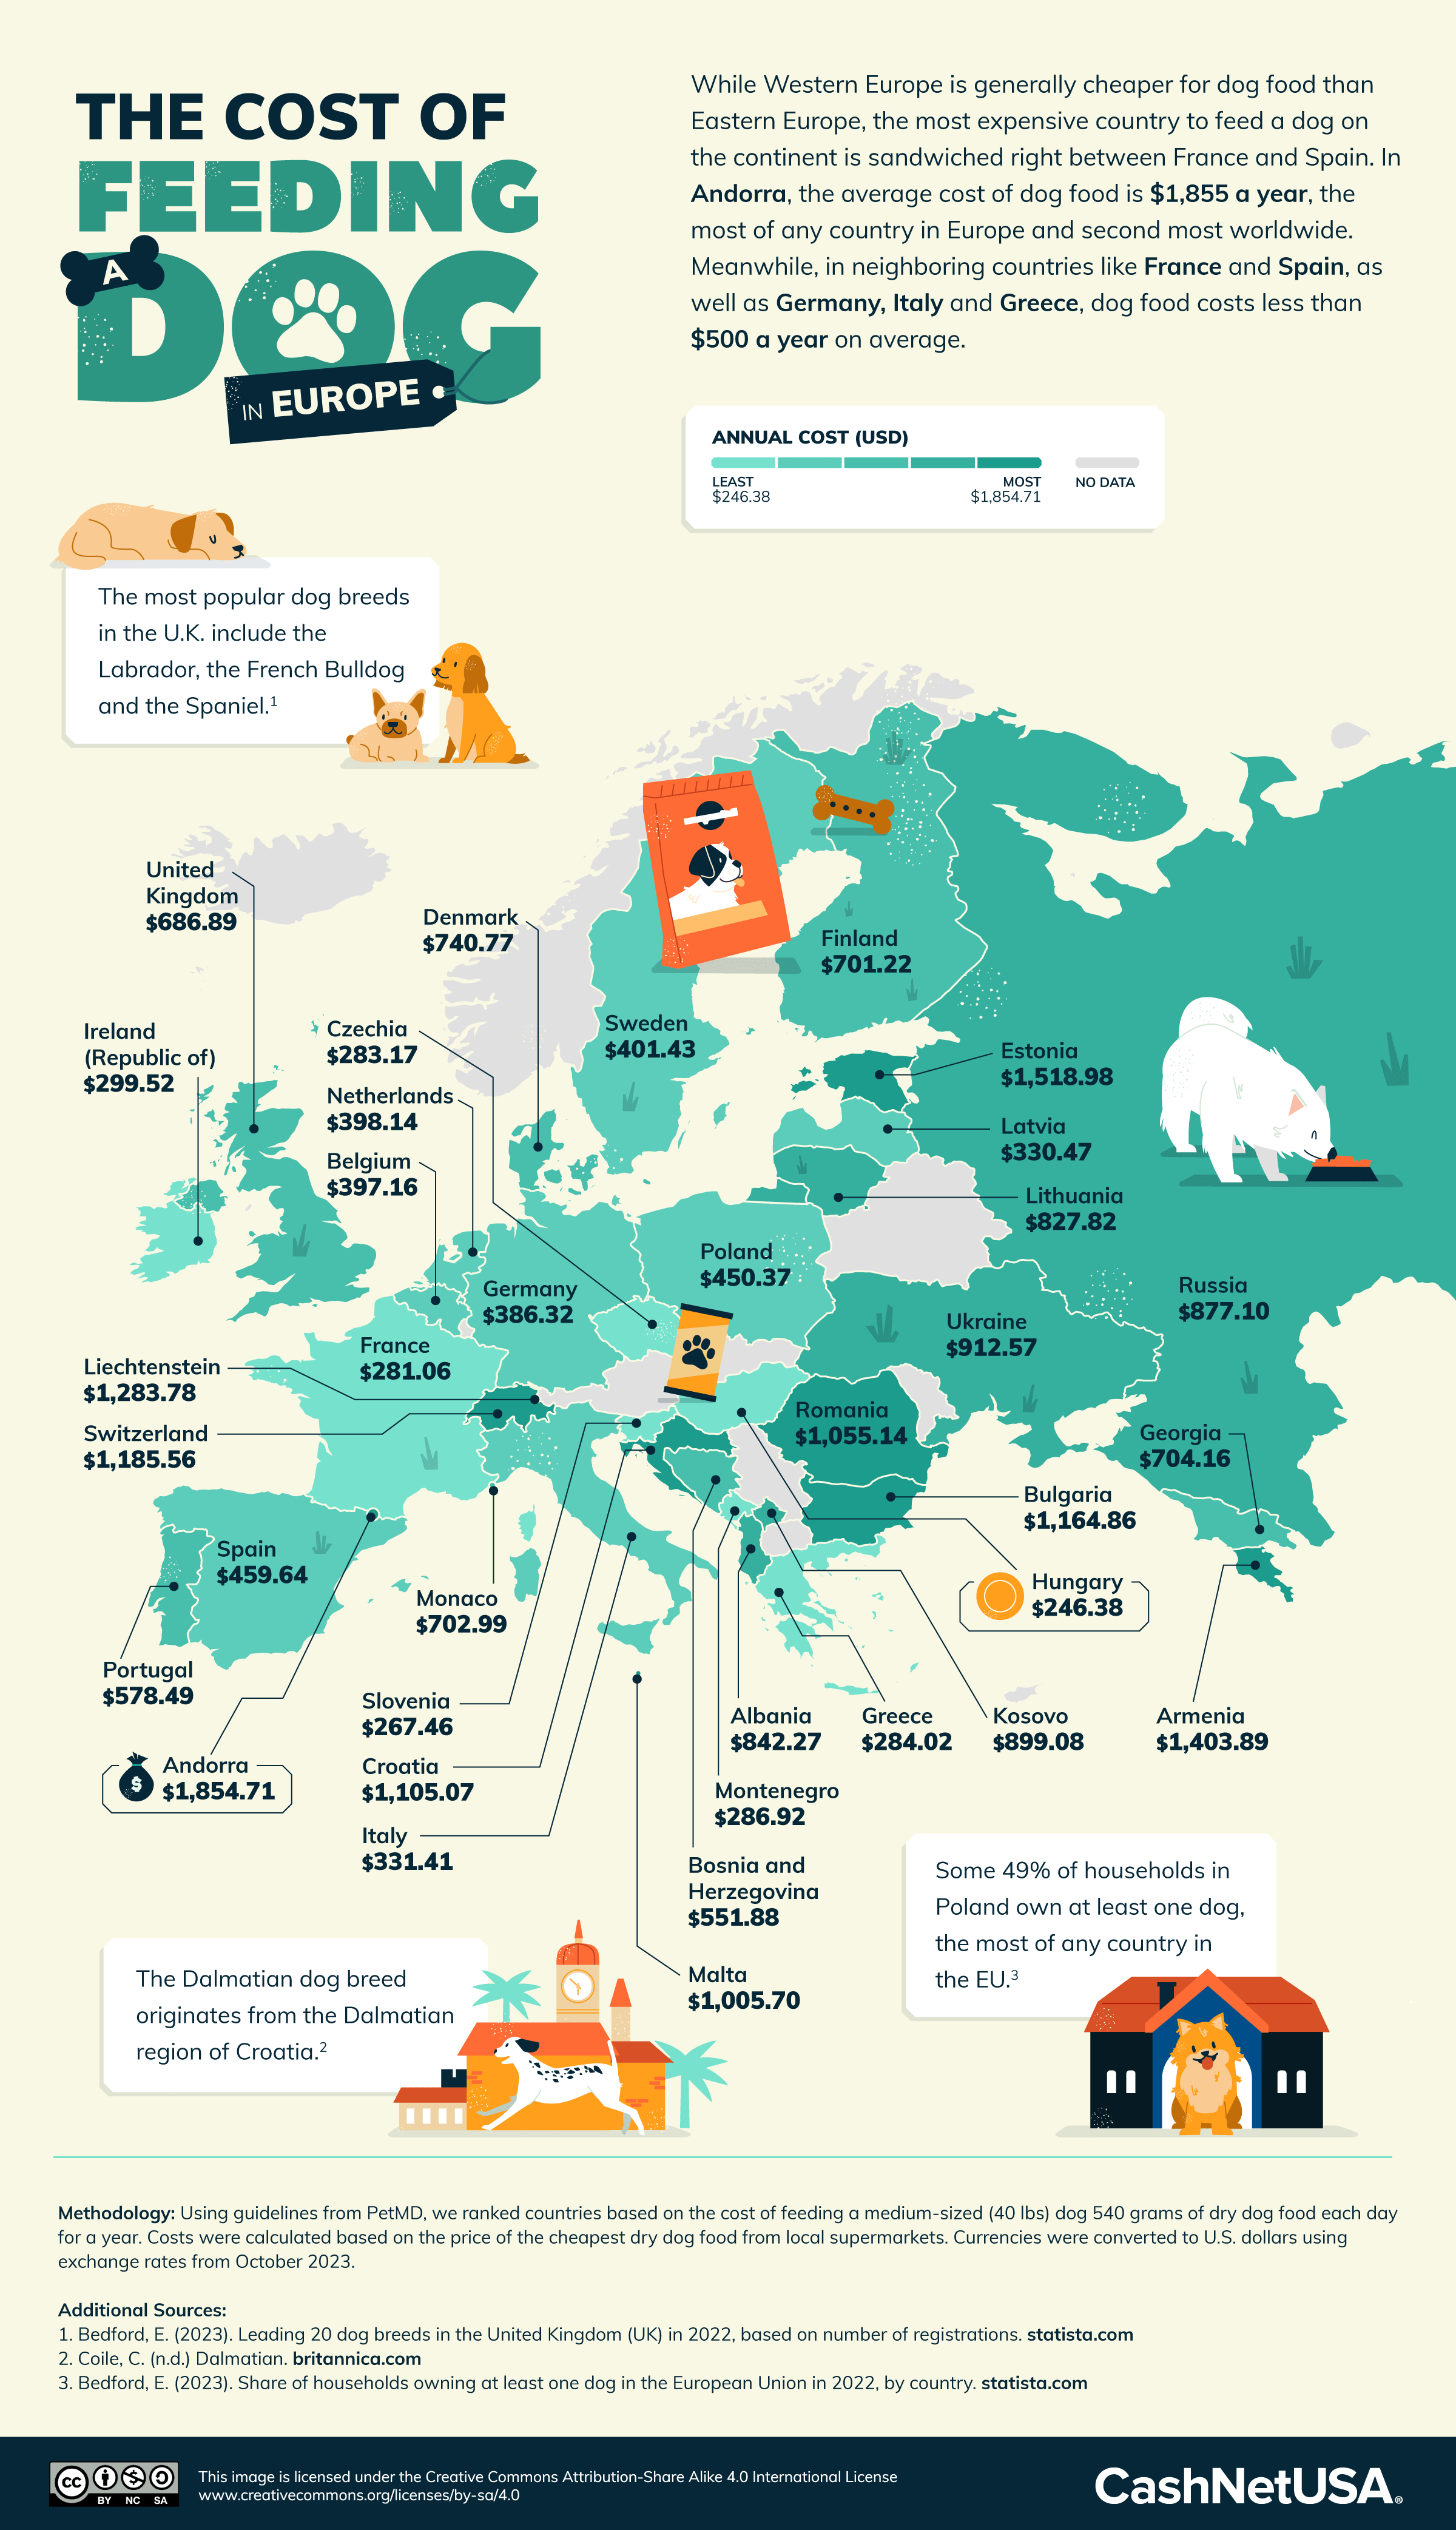 Infographic of the cost of feeding a dog in Europe.